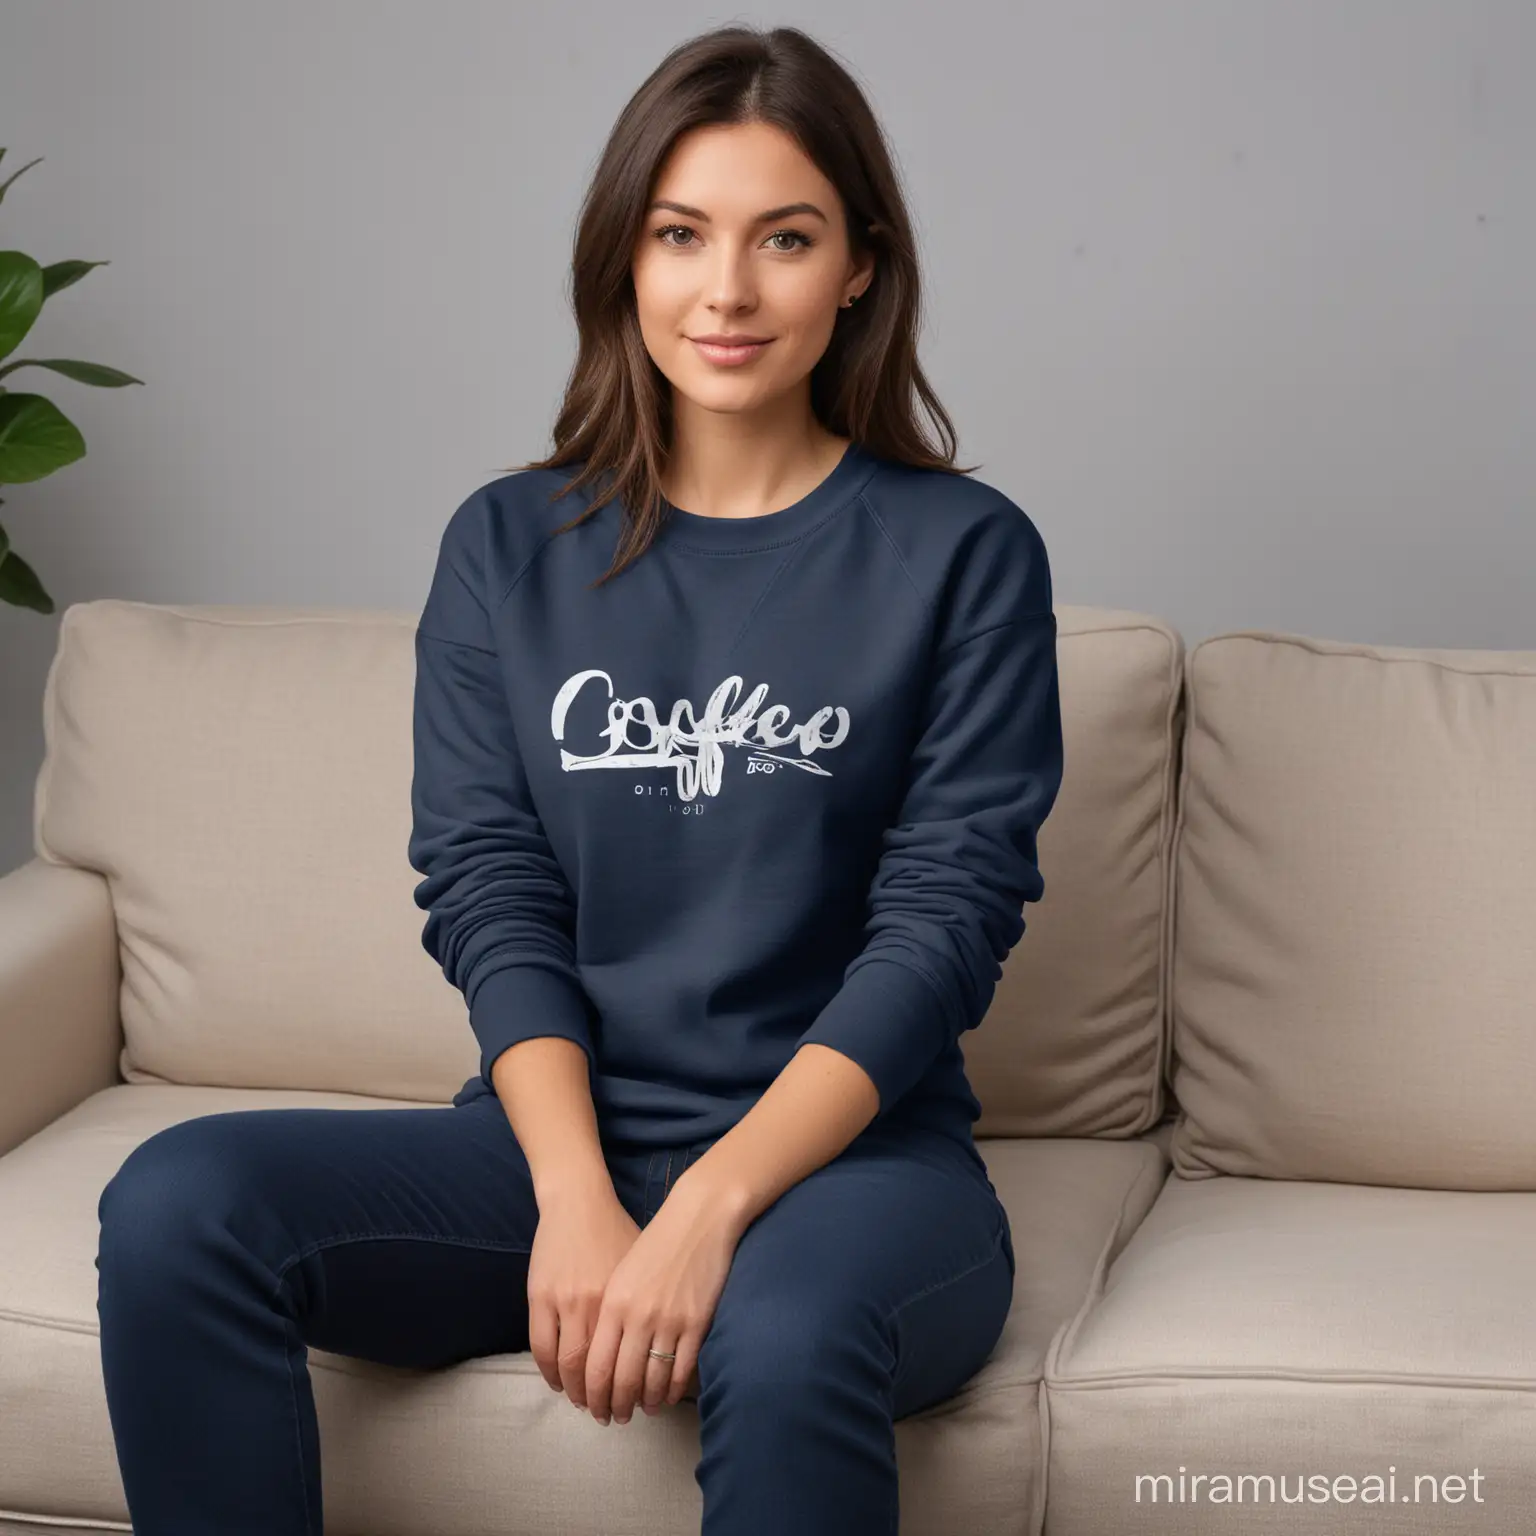 sweatshirt mockup in Oxford Navy with a blank tshirt, ladies, comfy, sitting on couch, holding a coffee, laid back